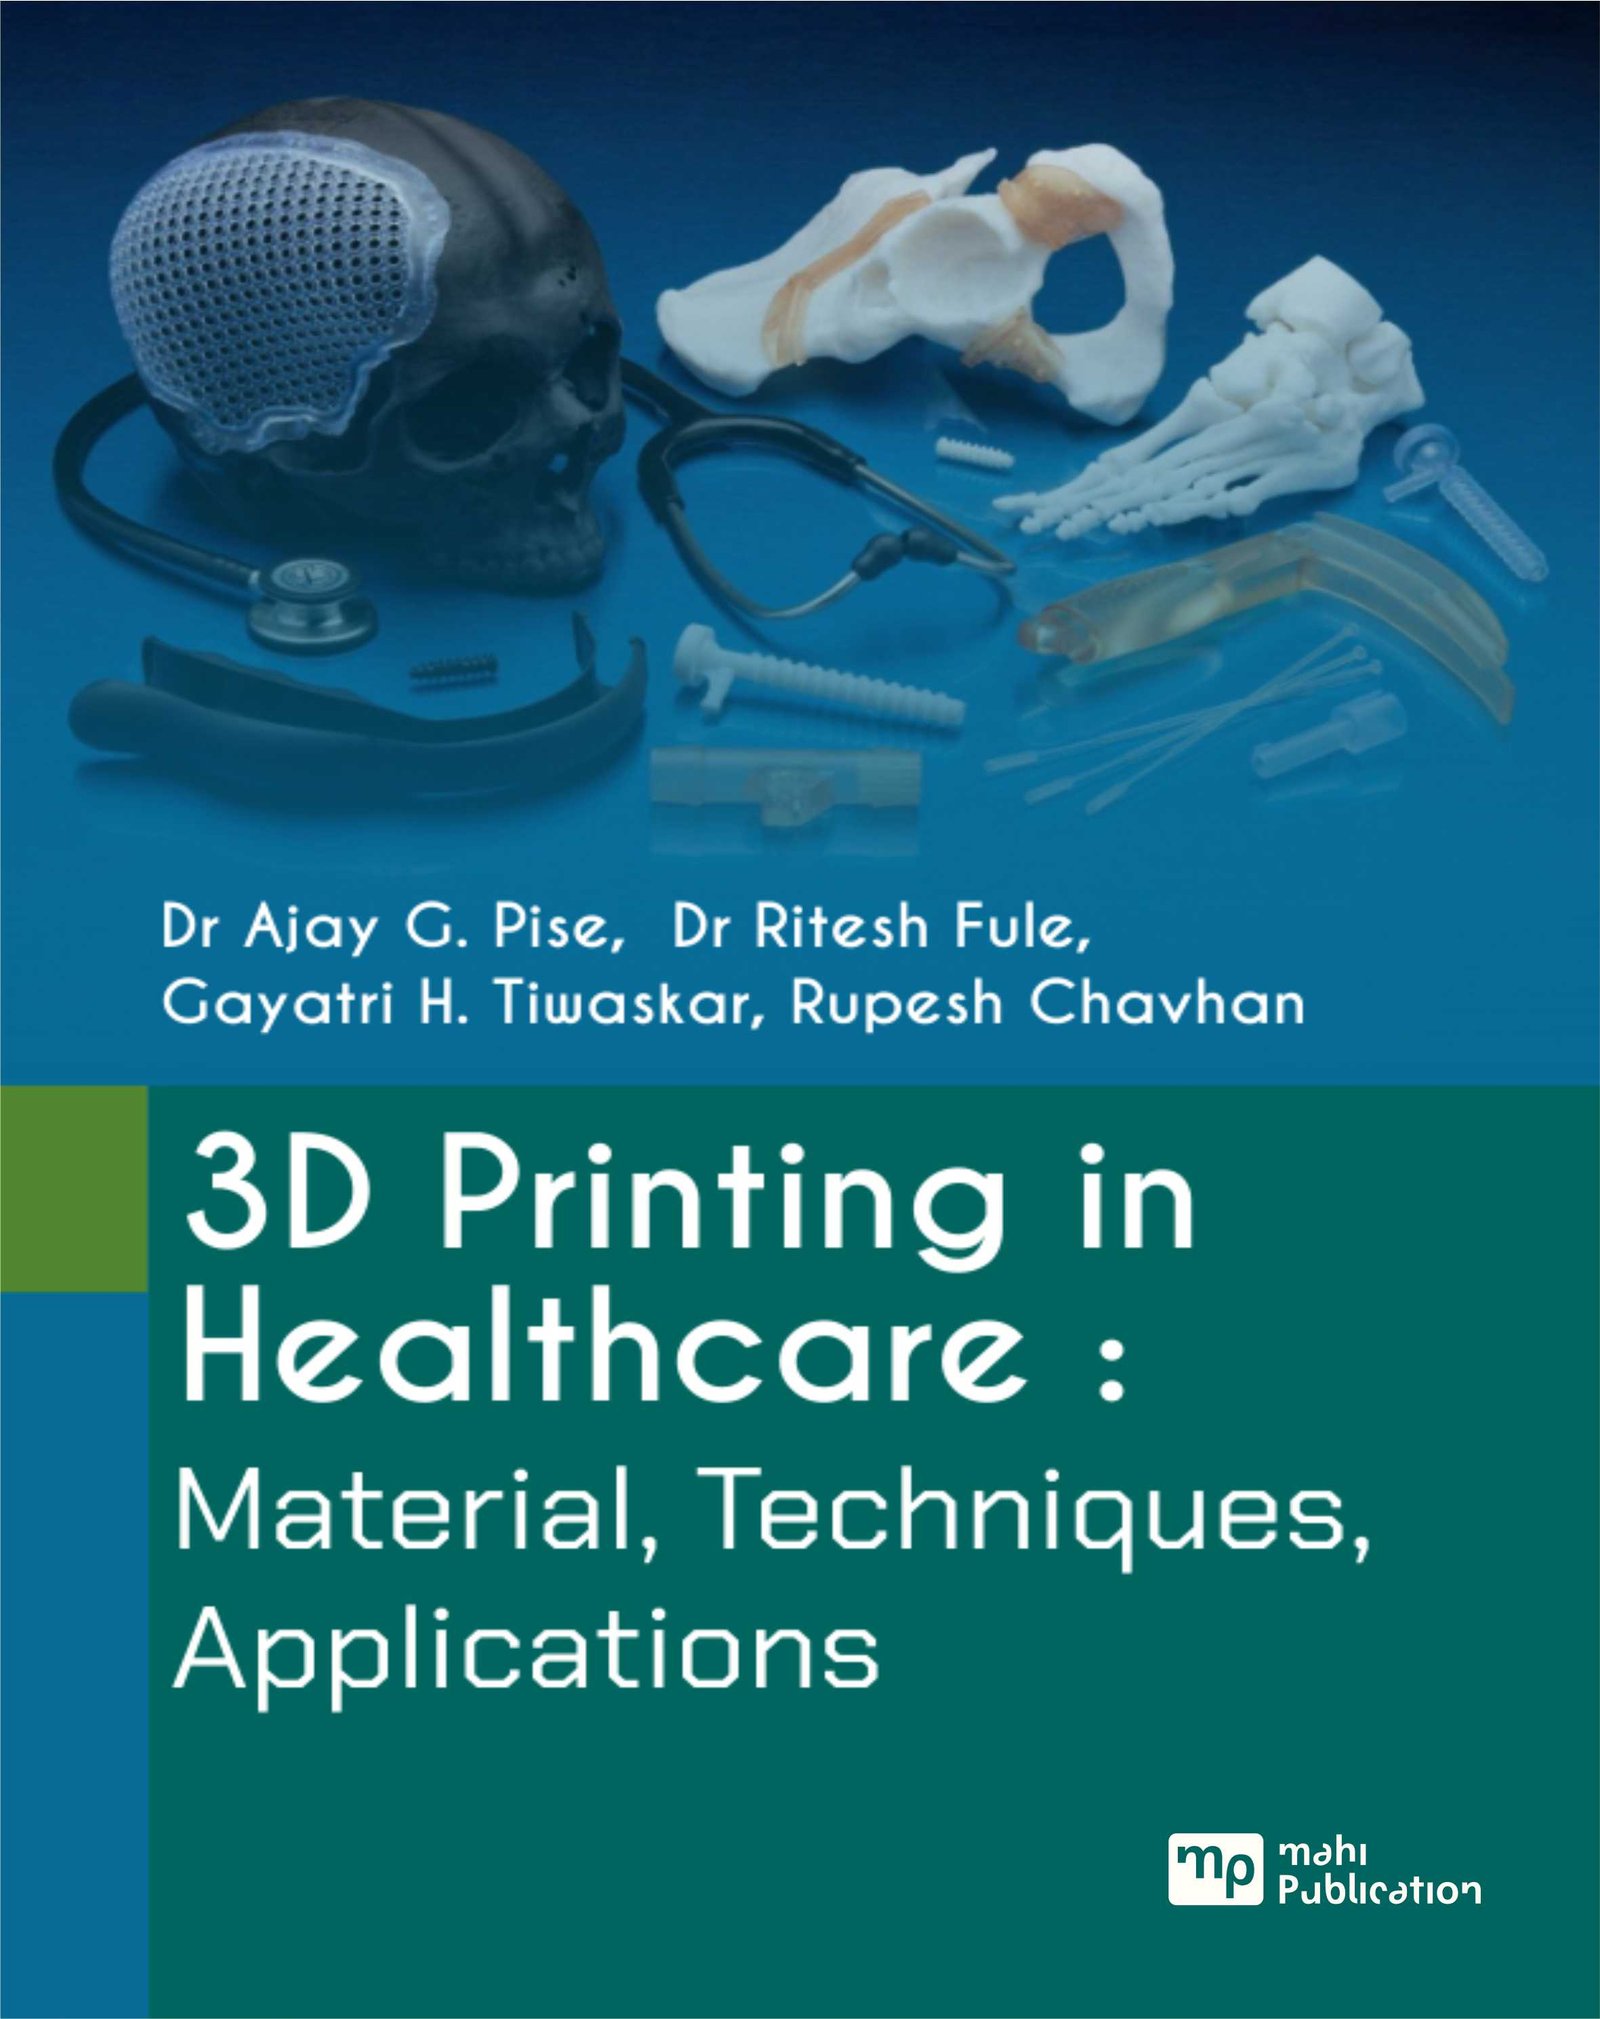 3D Printing In Healthcare: Material, Techniques, Applications